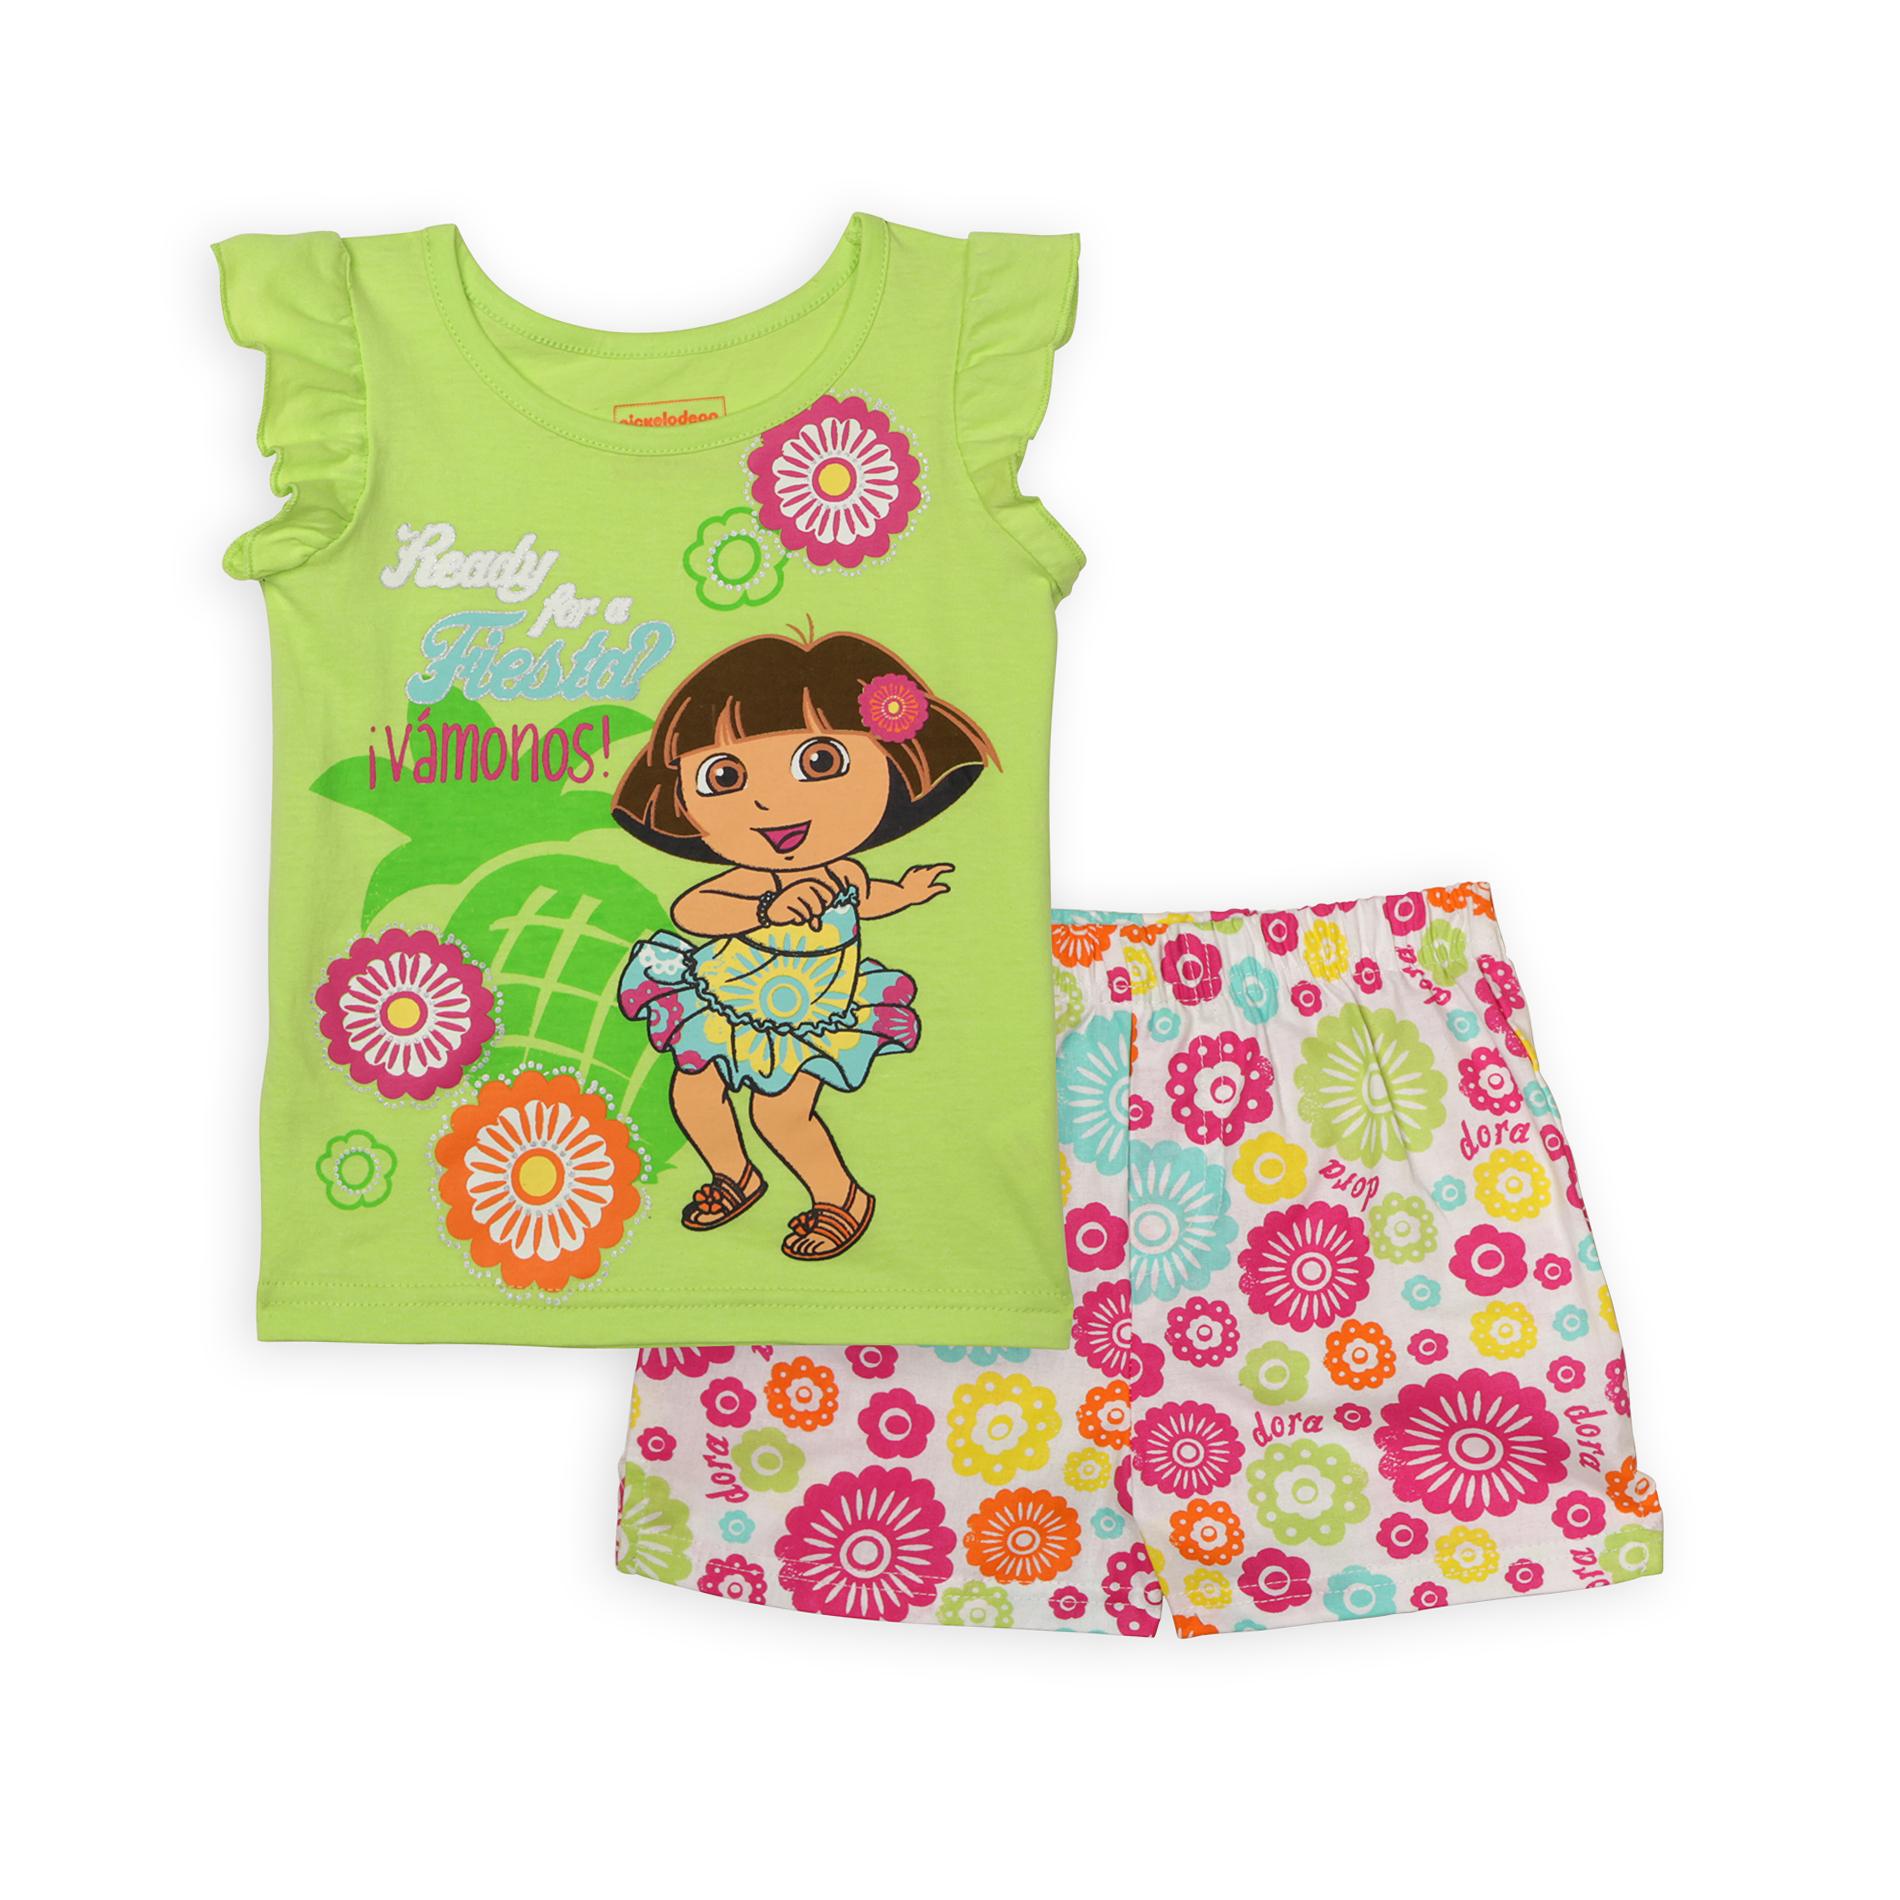 Nickelodeon Infant & Toddler Girl's Top & Shorts - Floral